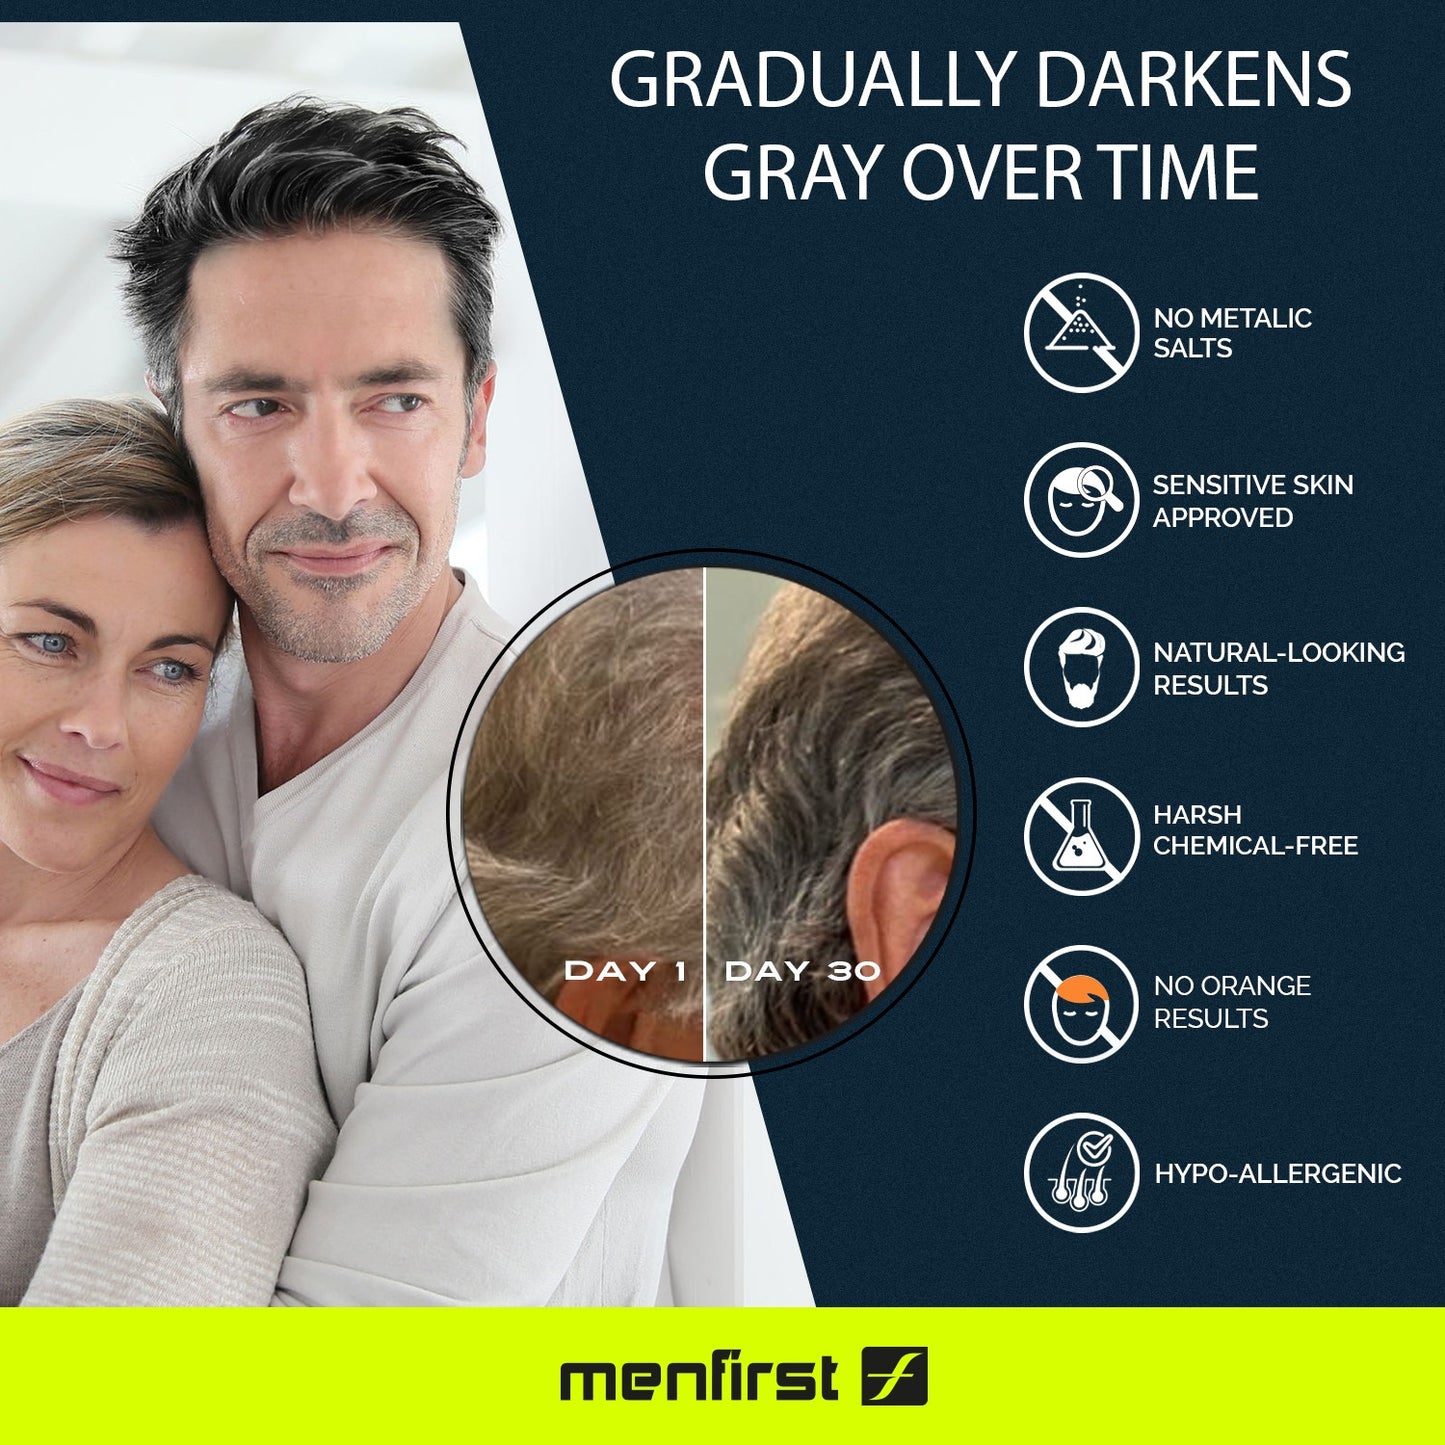 Menfirst Club: Gray Hair Care Made Easy - Monthly Gradual Gray 3-in-1 Shampoo Subscription - Buy and Save!